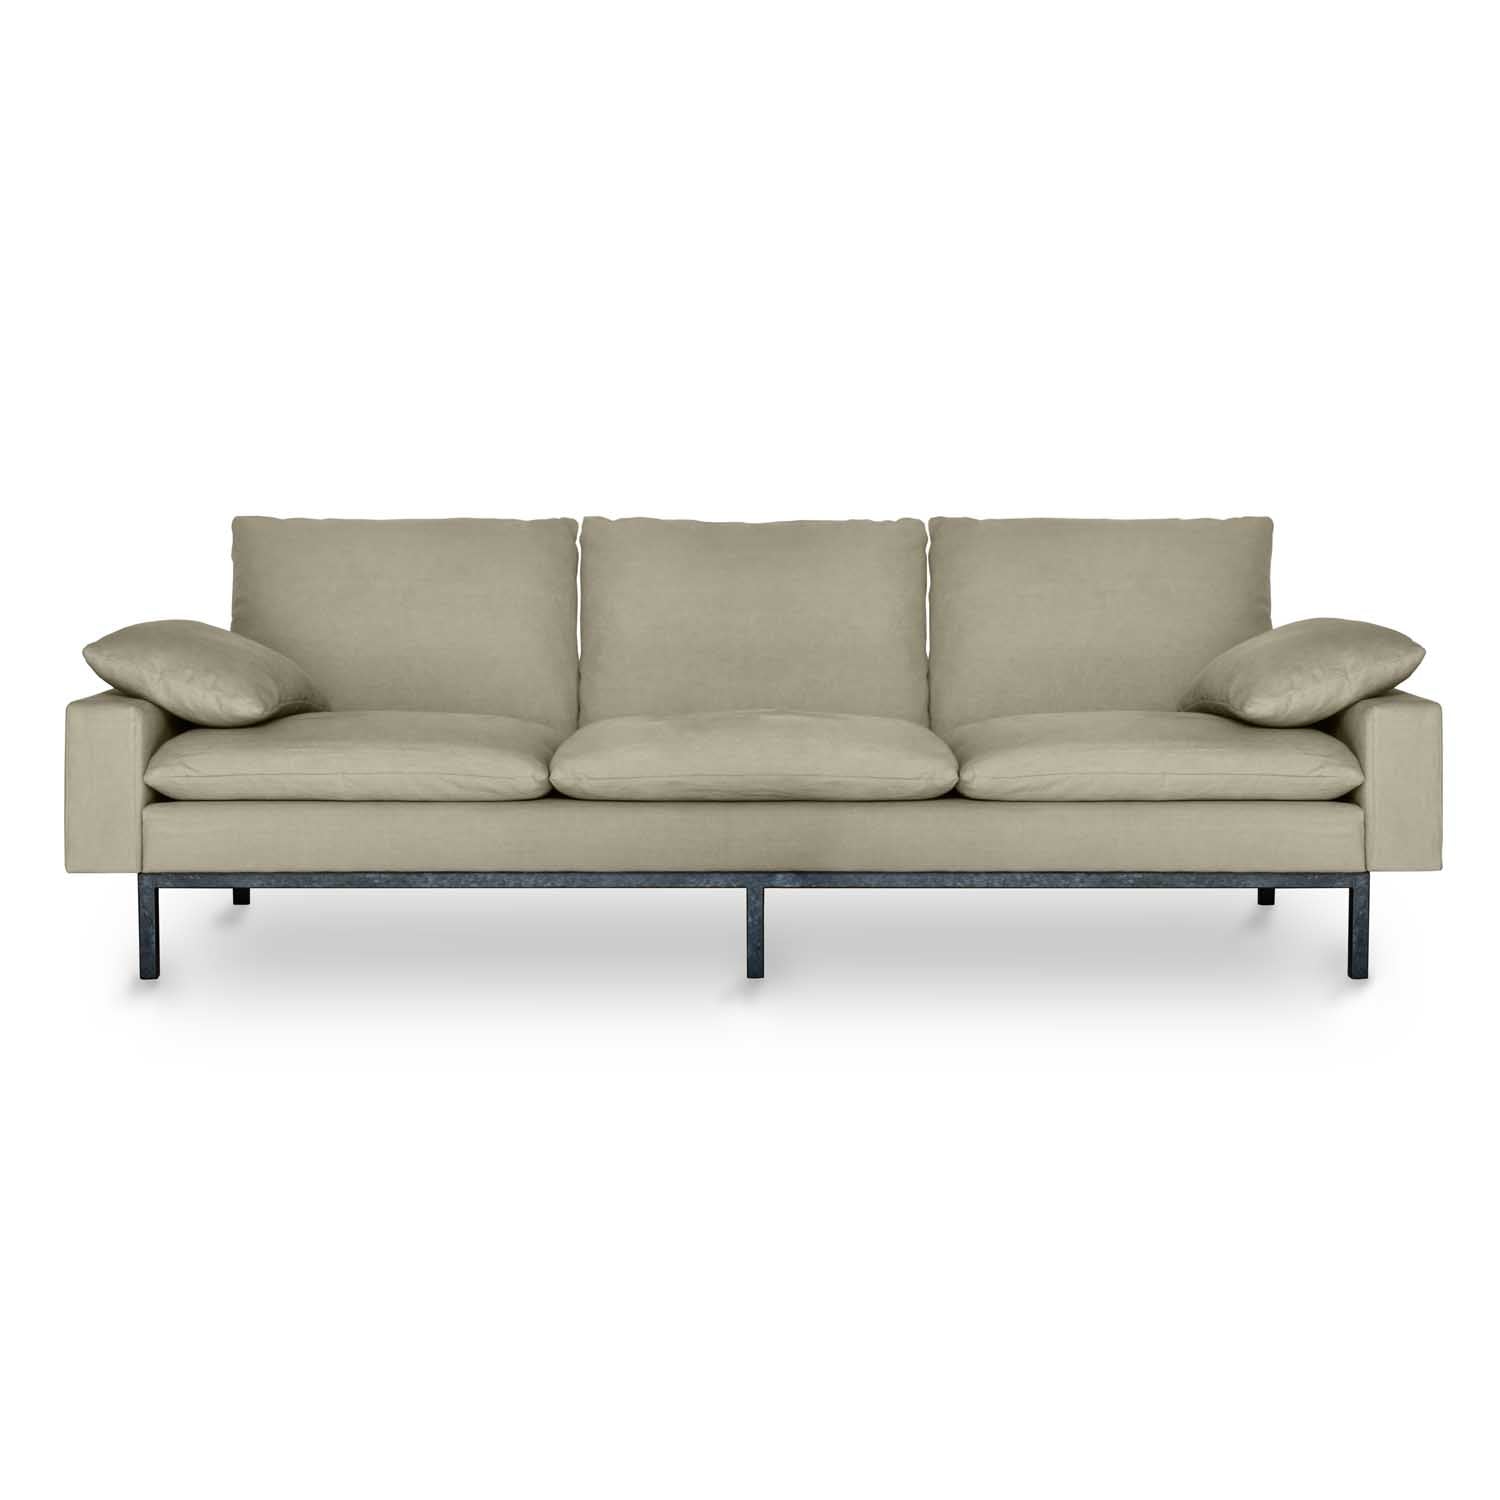 Customizable Armrest Placements for Your Perfect Rest. beige linen sofa big.